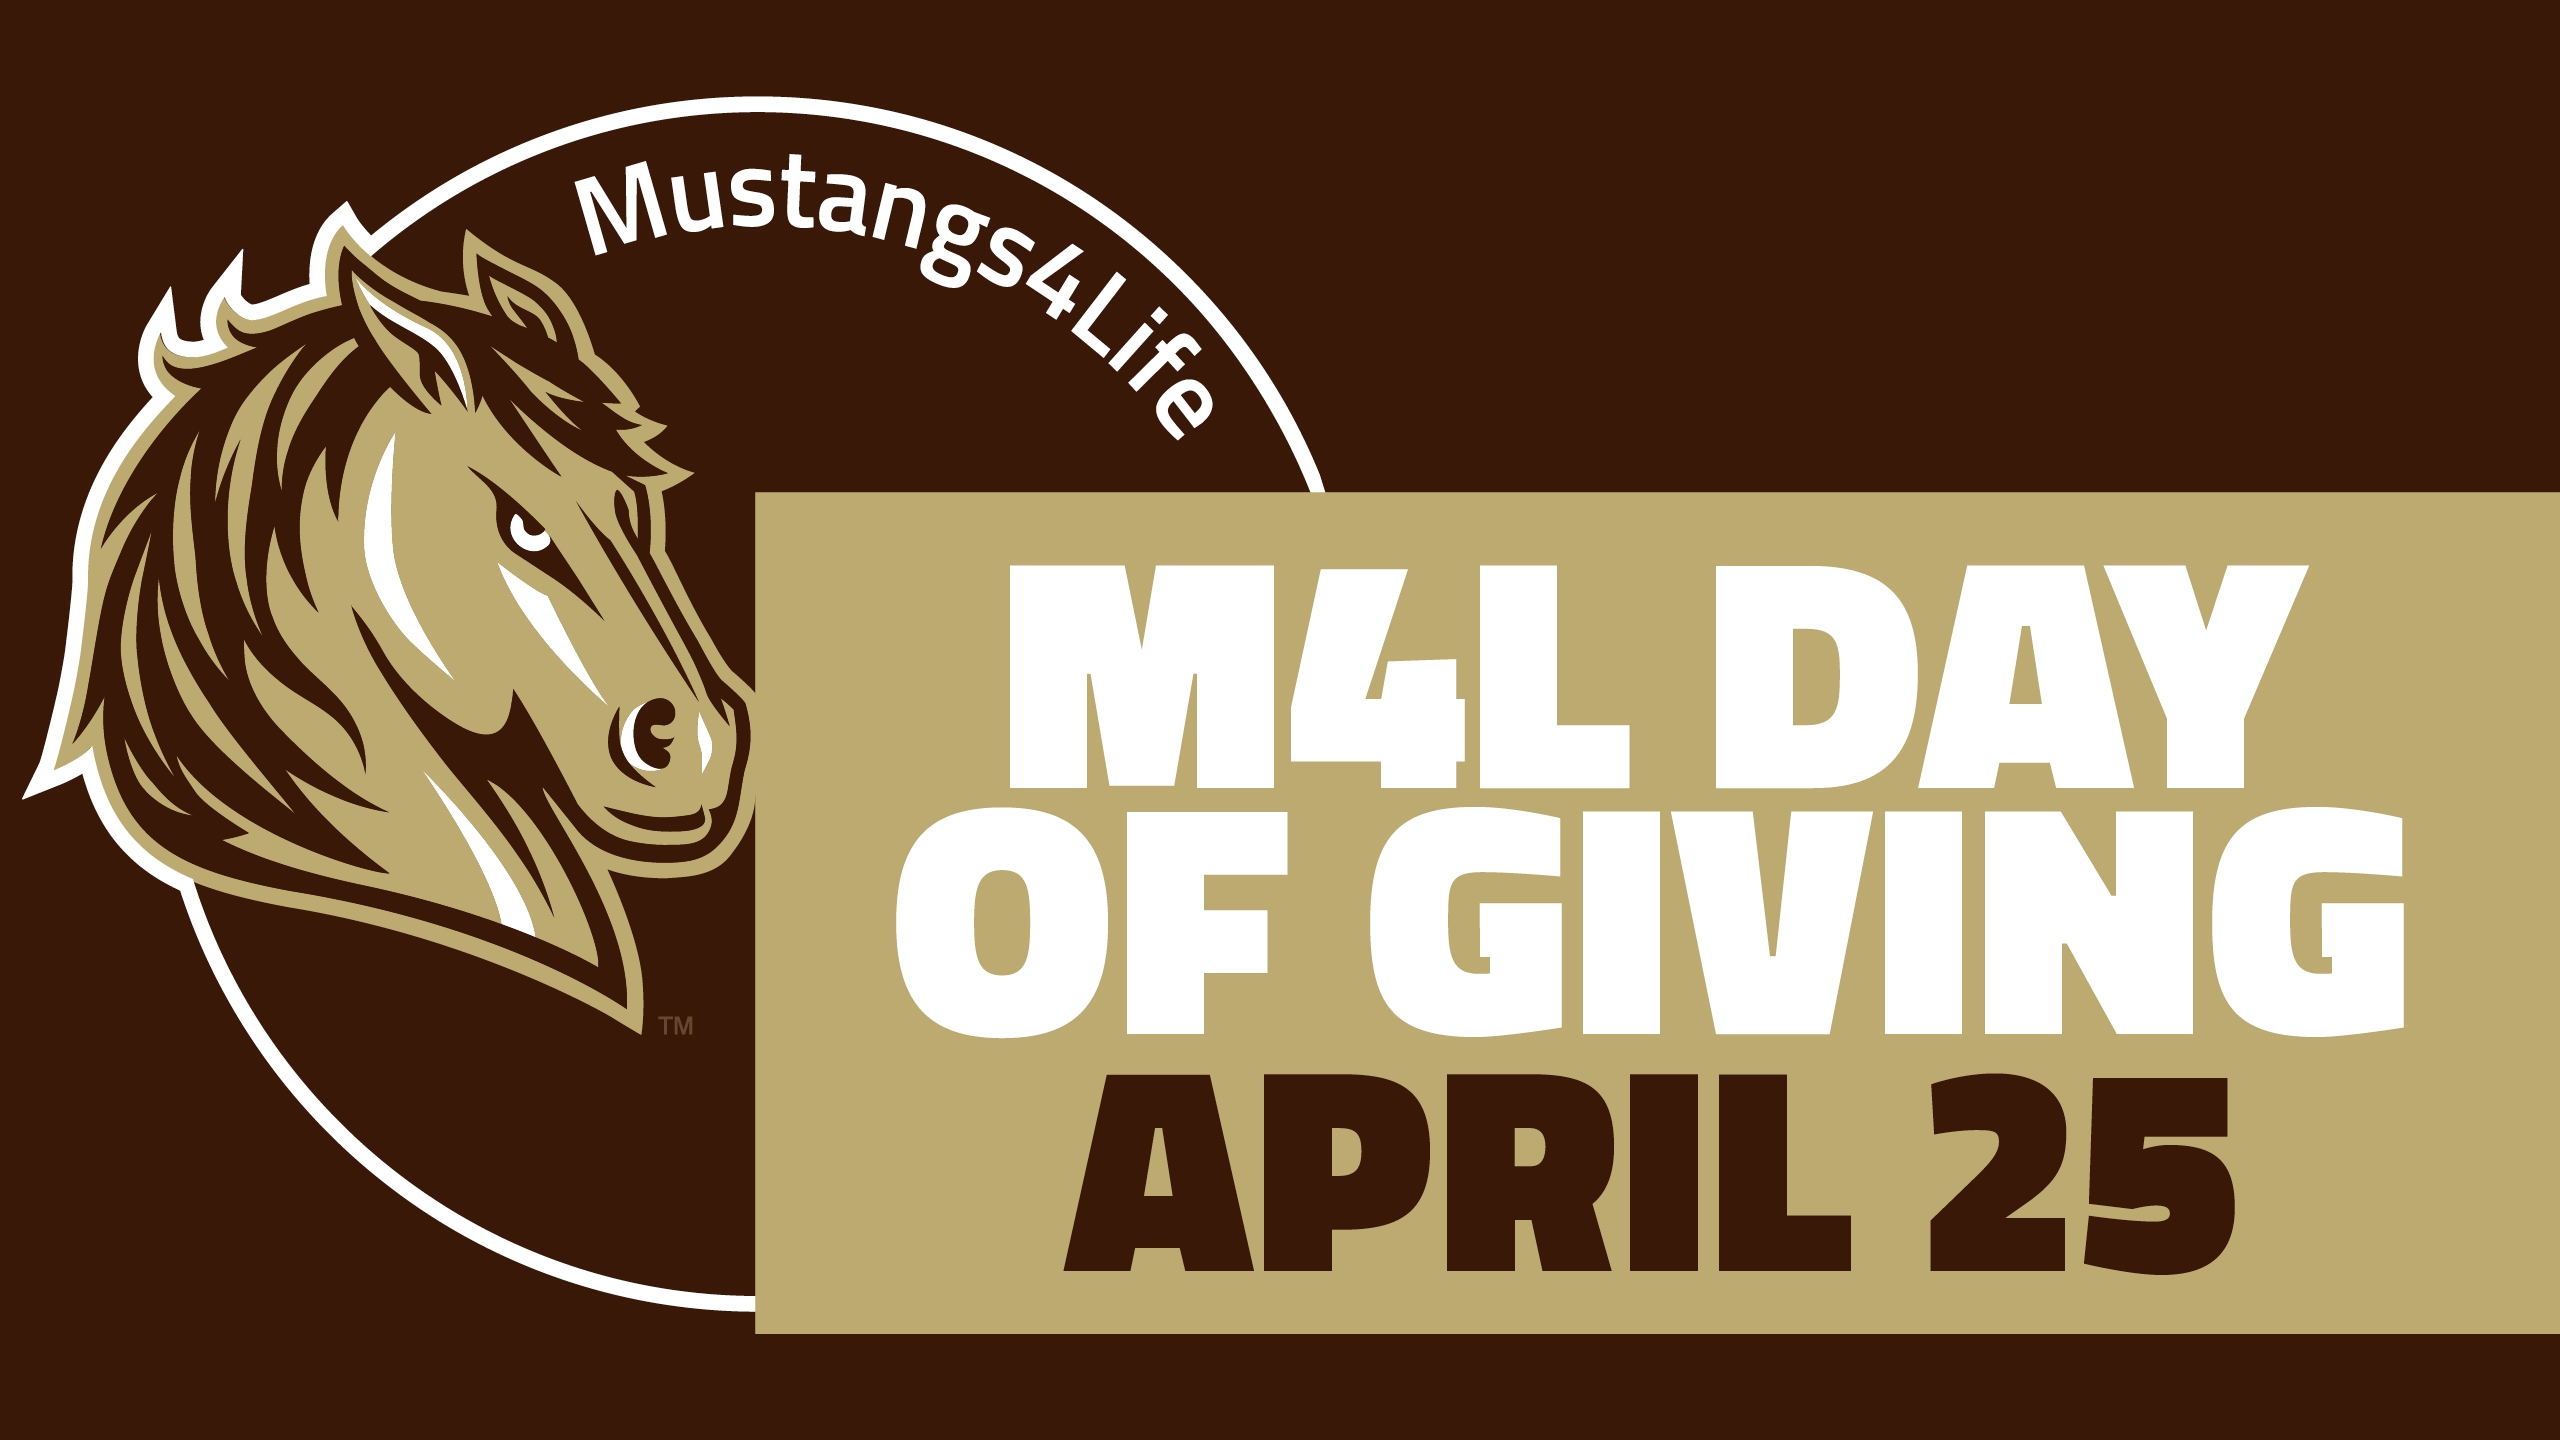 Photo: 3rd Annual M4L Day of Giving is April 25